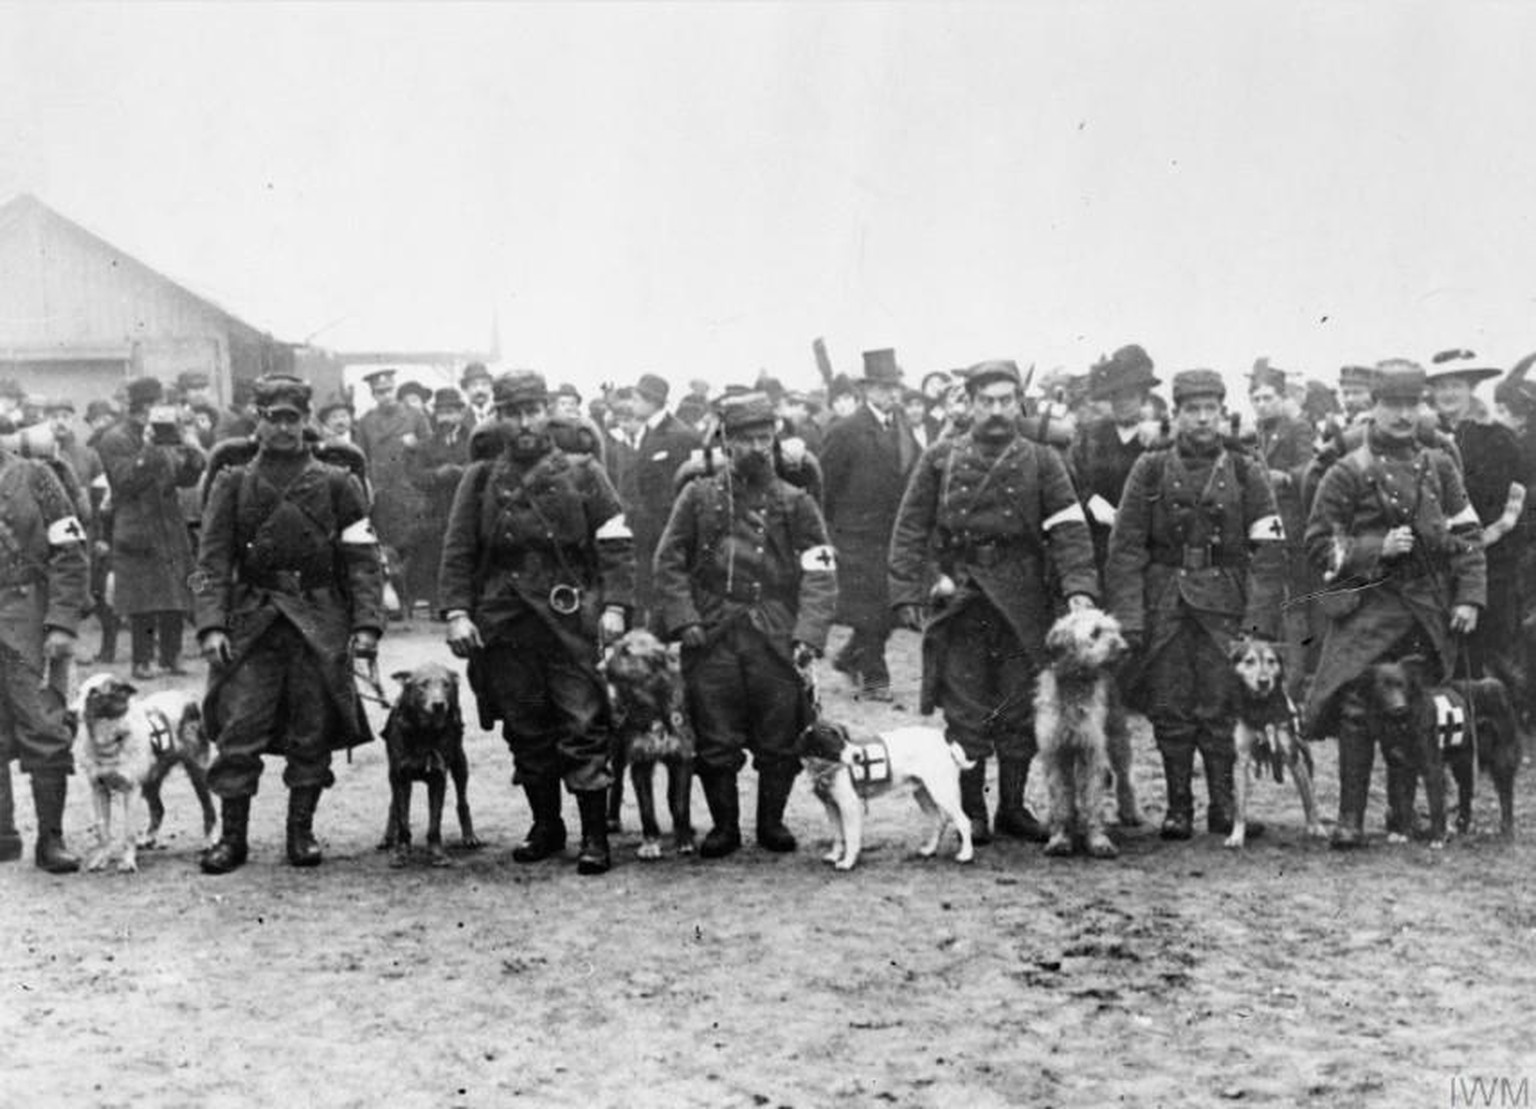 French Red Cross dogs line up for inspection on the Western Front, 1914. These specially trained dogs wore harnesses containing medical equipment, which they delivered to injured soldiers on the battl ...